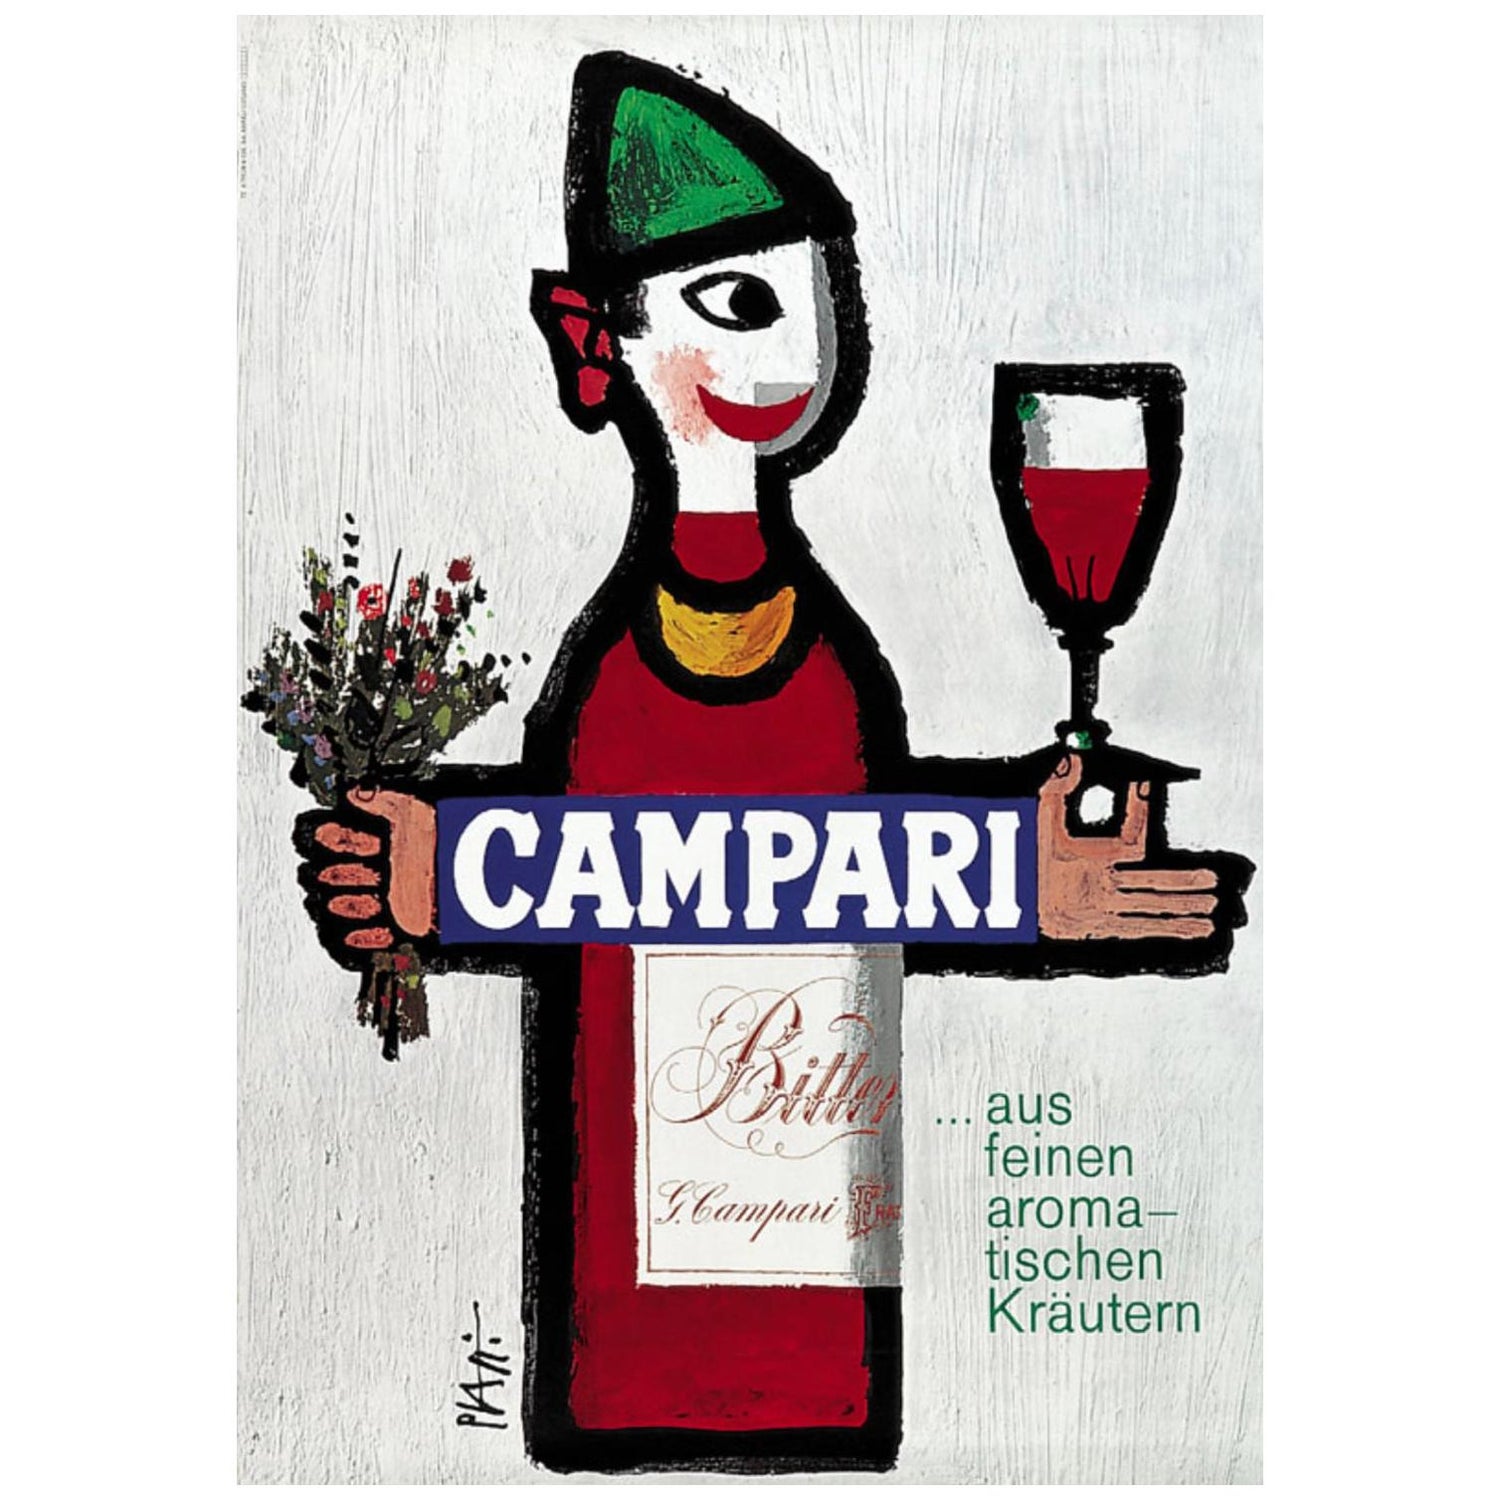 Advertising Bitter Campari 1921 Giant Wall Mural Art Poster Print 33x47 Inches